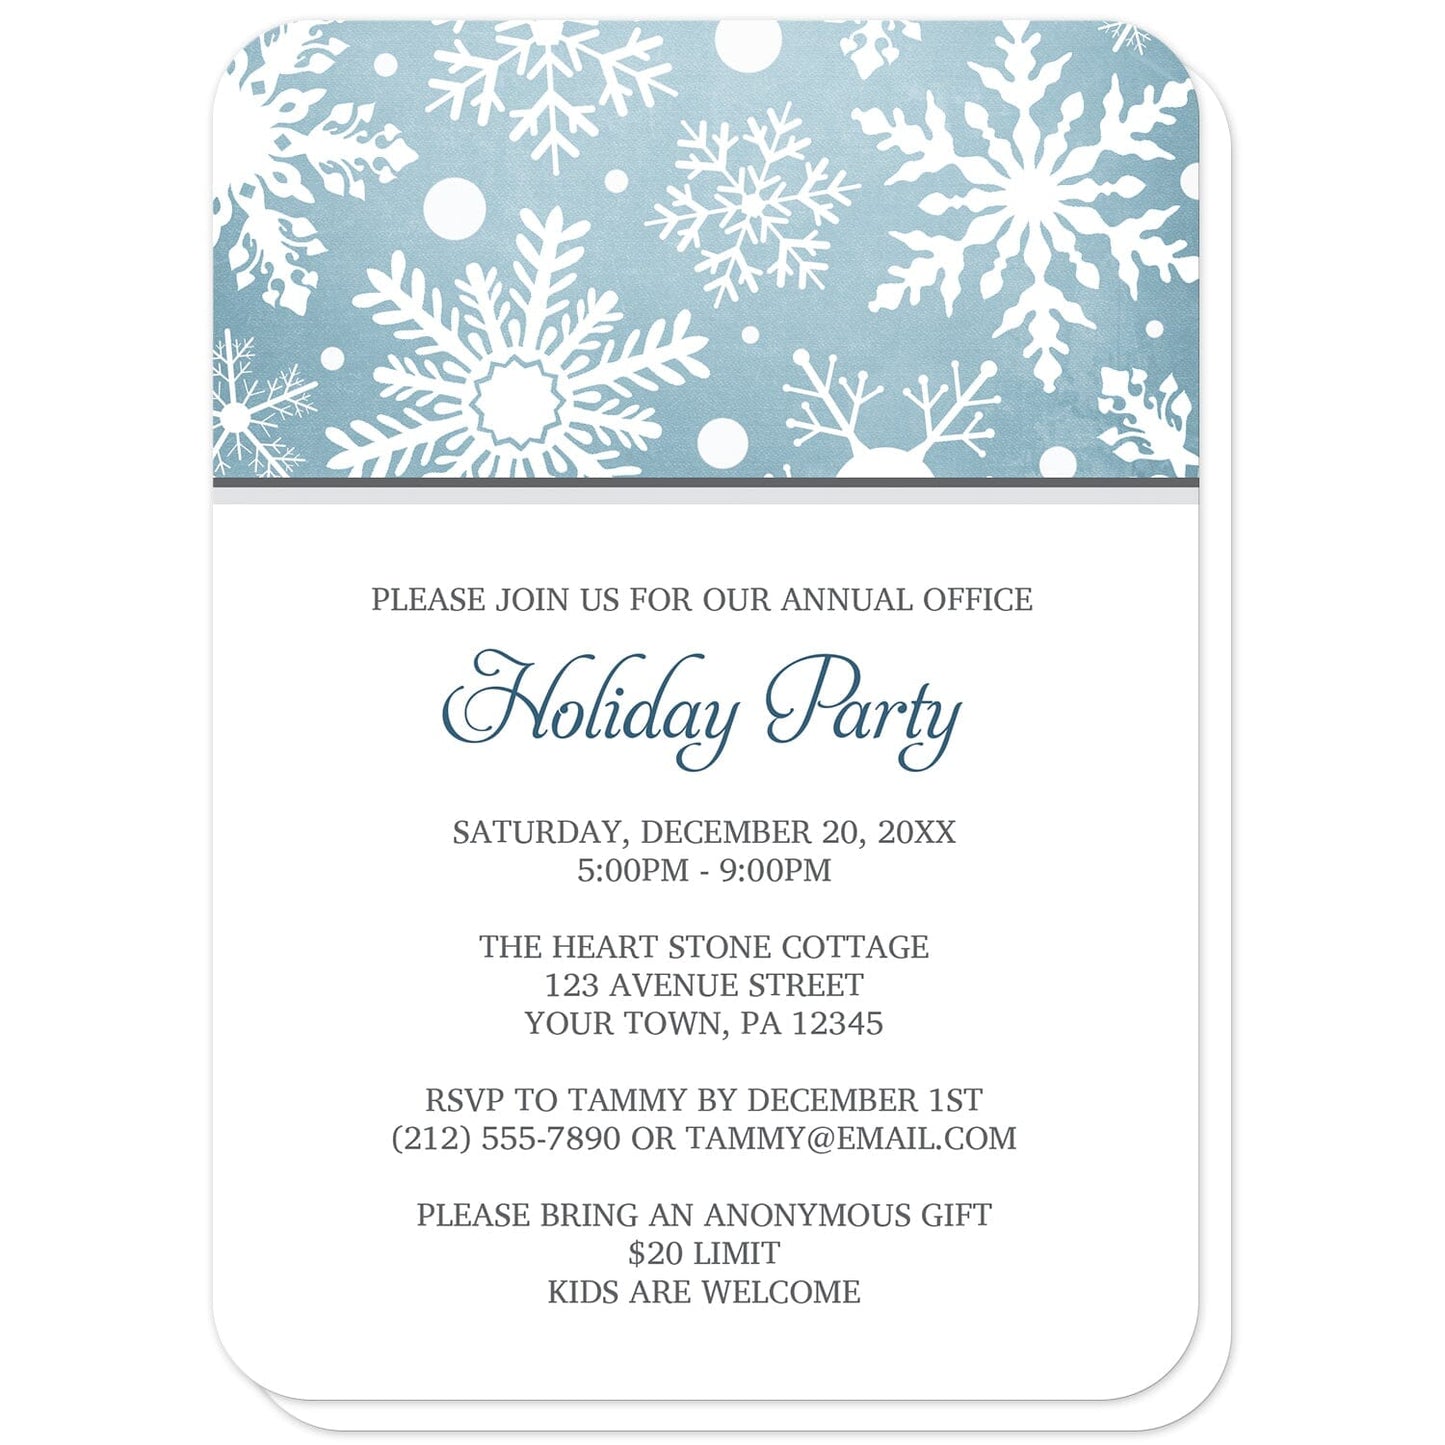 Winter Snowflake Blue Gray Holiday Party Invitations (with rounded corners) at Artistically Invited. Modern winter snowflake blue gray holiday party invitations designed with a white snowflakes pattern over an organic blue wintry background at the top of the invitations. Your personalized holiday celebration details are custom printed in blue and gray on white below the snowflakes. 